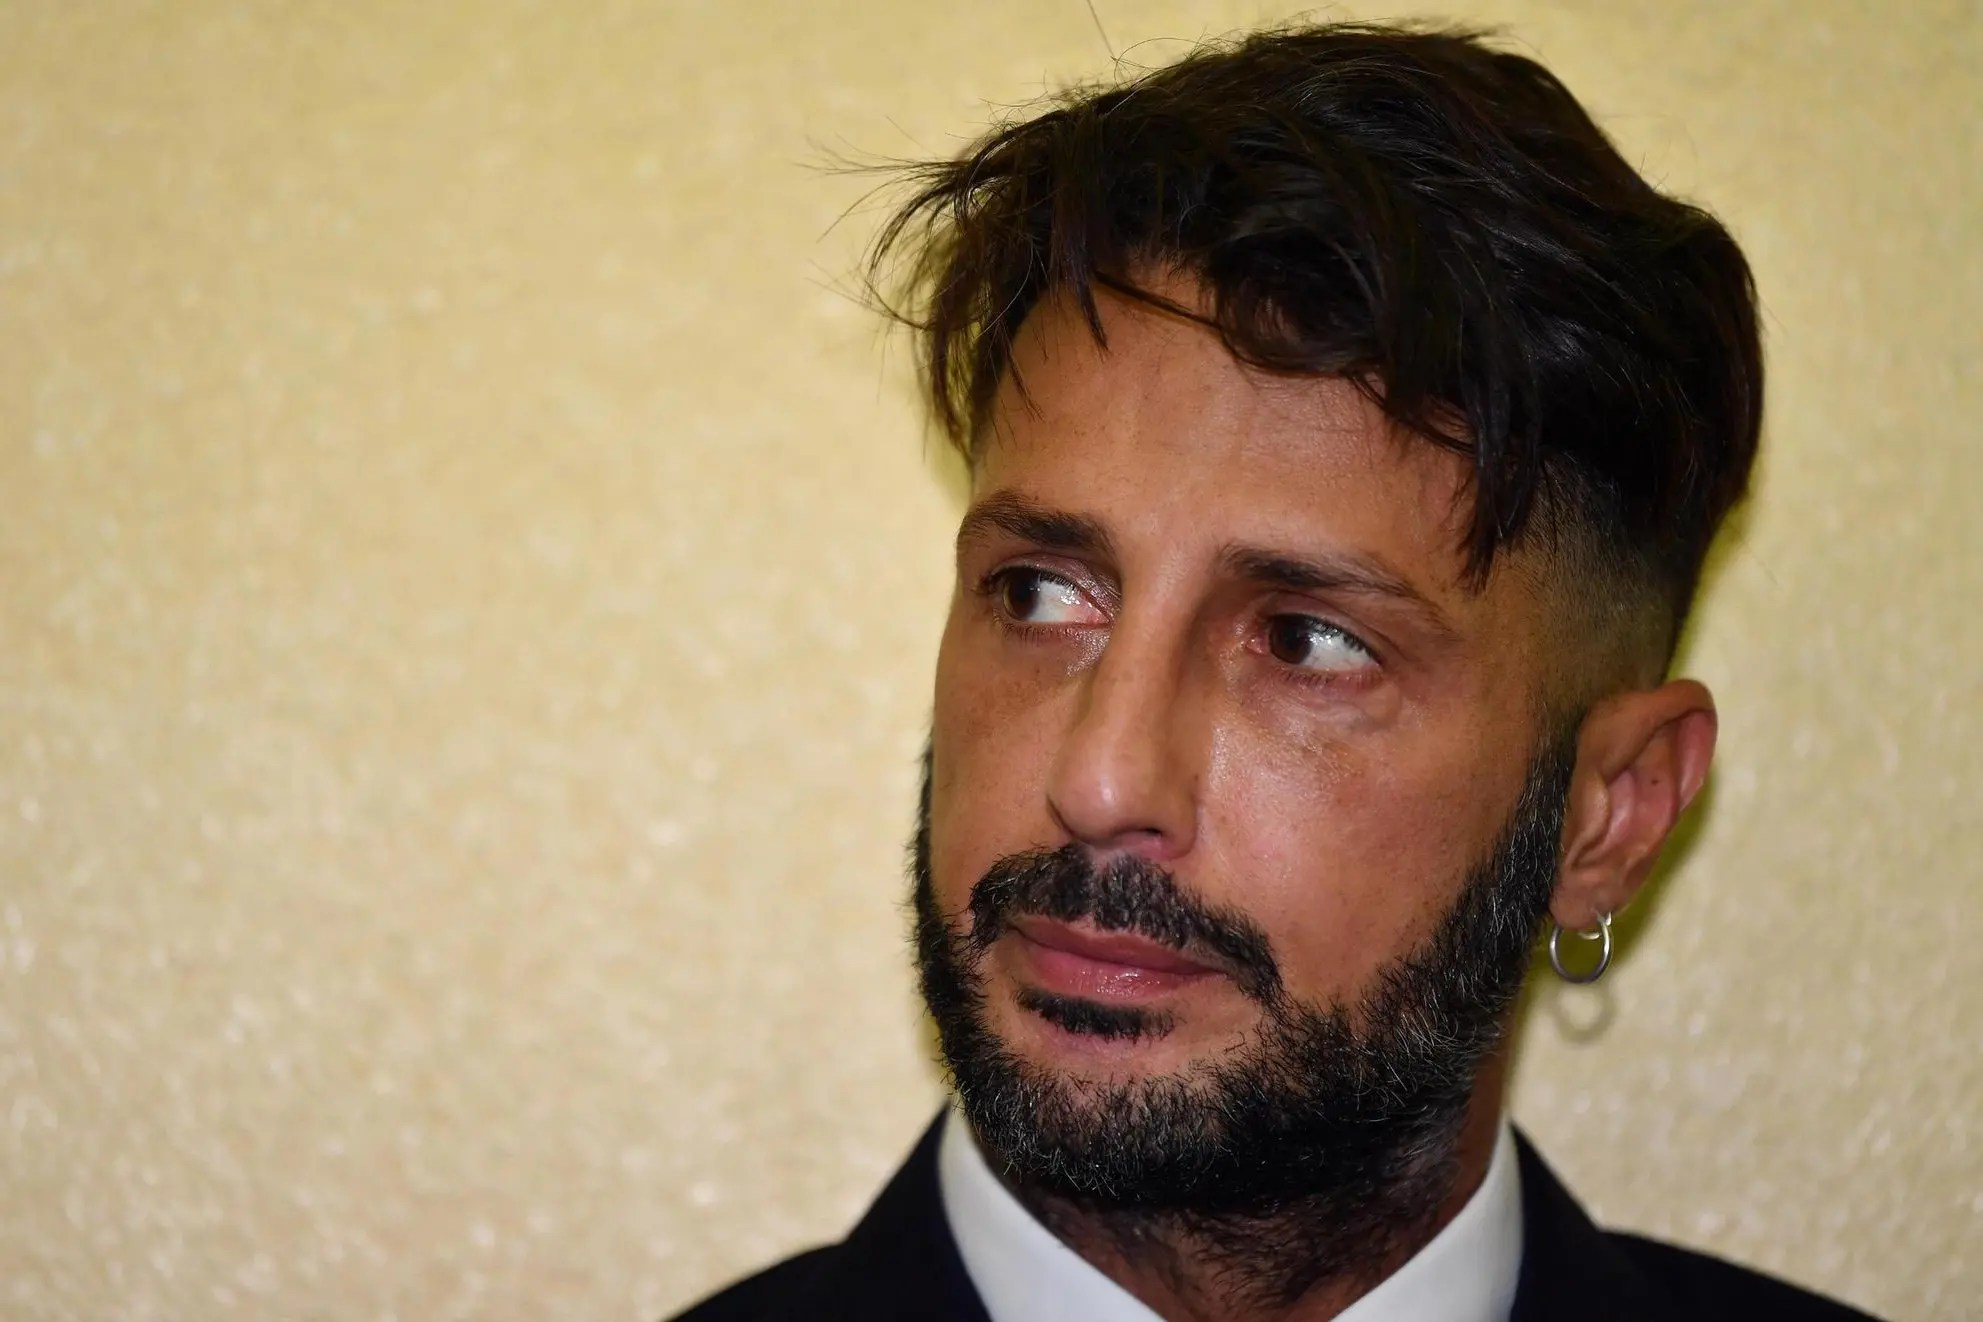 Italian photographic agent, television and media personality Fabrizio Corona wait for the hearing in Milan, 21 September 2018. Fabrizio Corona was sentenced to one year by the Court of Milan in the process with the center about 2.6 million euros in cash found partly in a false ceiling and partly in safe deposit boxes in Austria. ANSA/DANIEL DAL ZENNARO